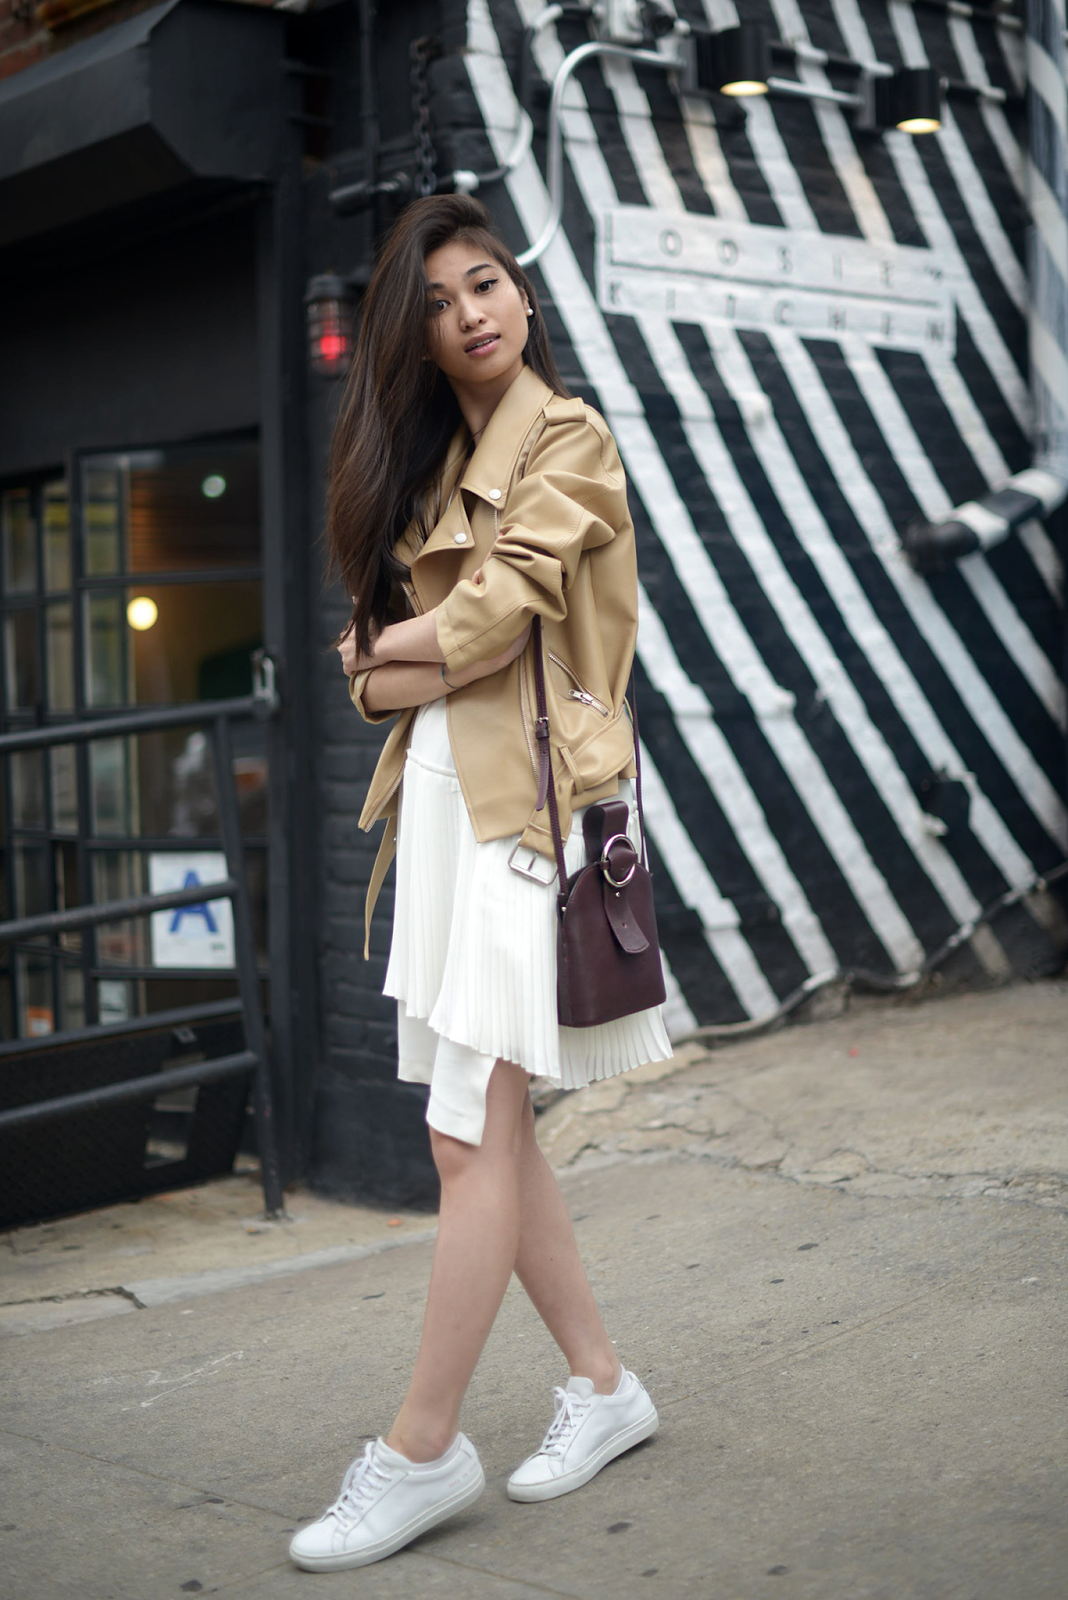 Camel Coat and Pleated Dress | FOREVERVANNY.com